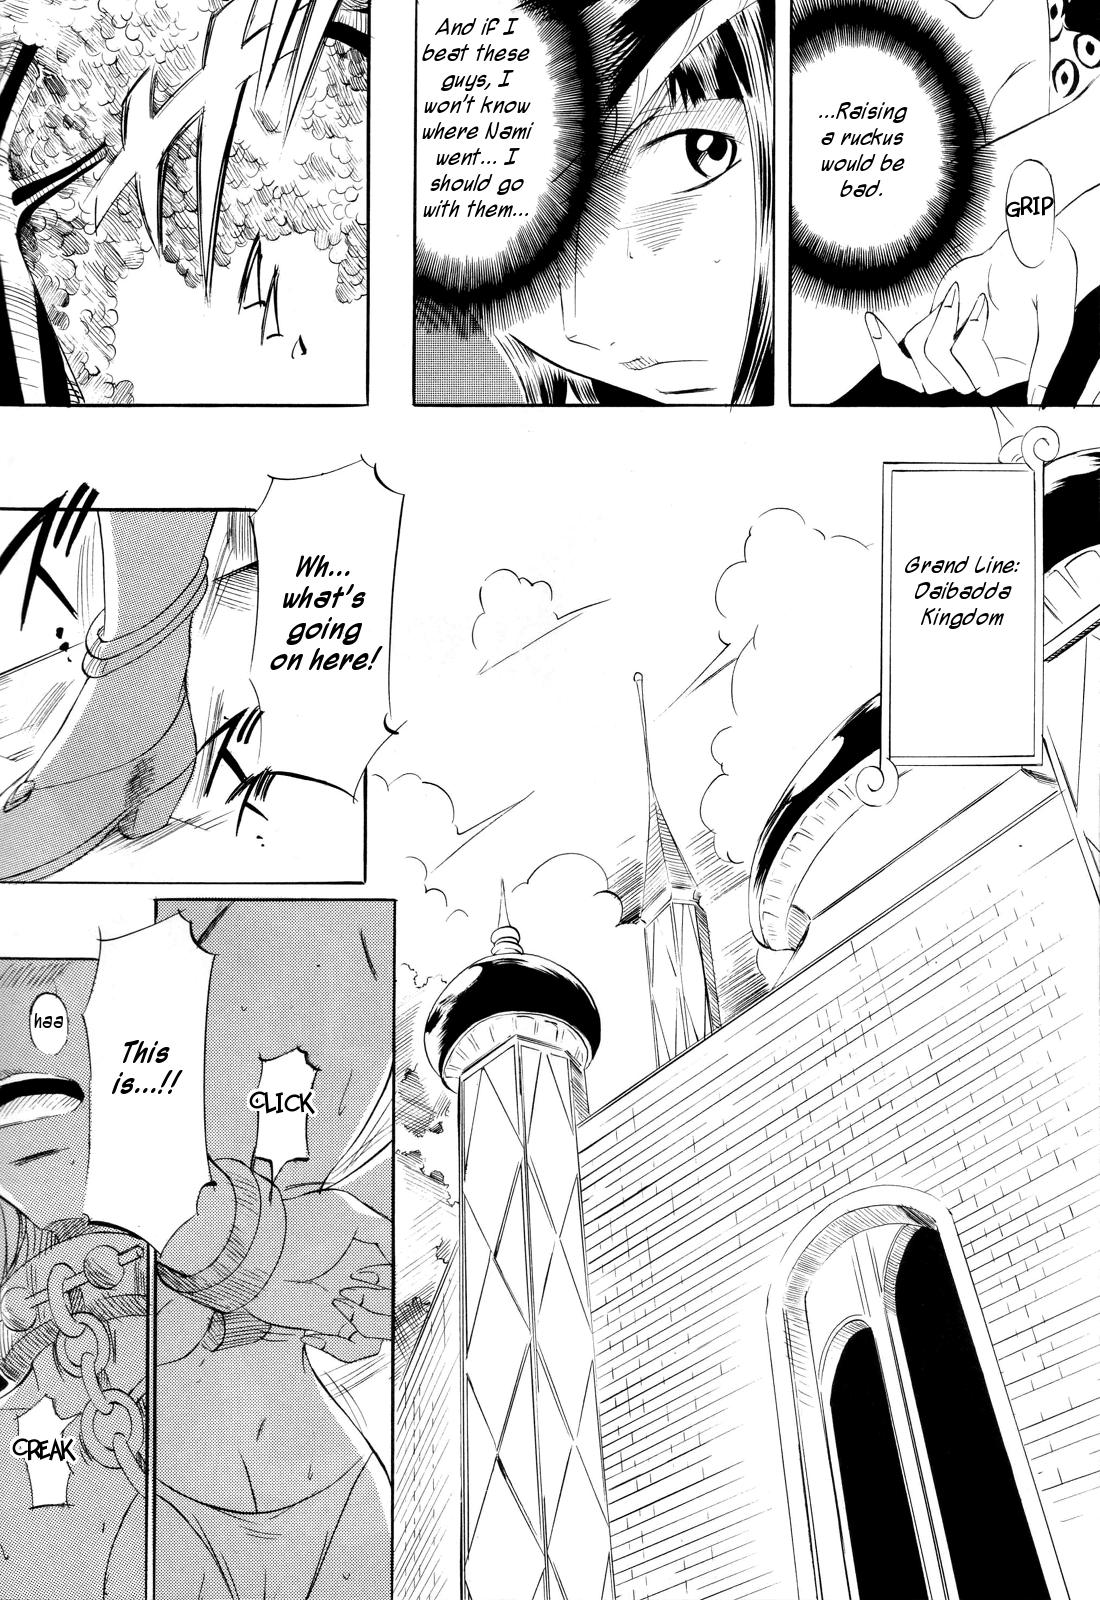 Buttplug Piece of Girl's kan2 Nami-Robi Hen - One piece Viet - Page 5